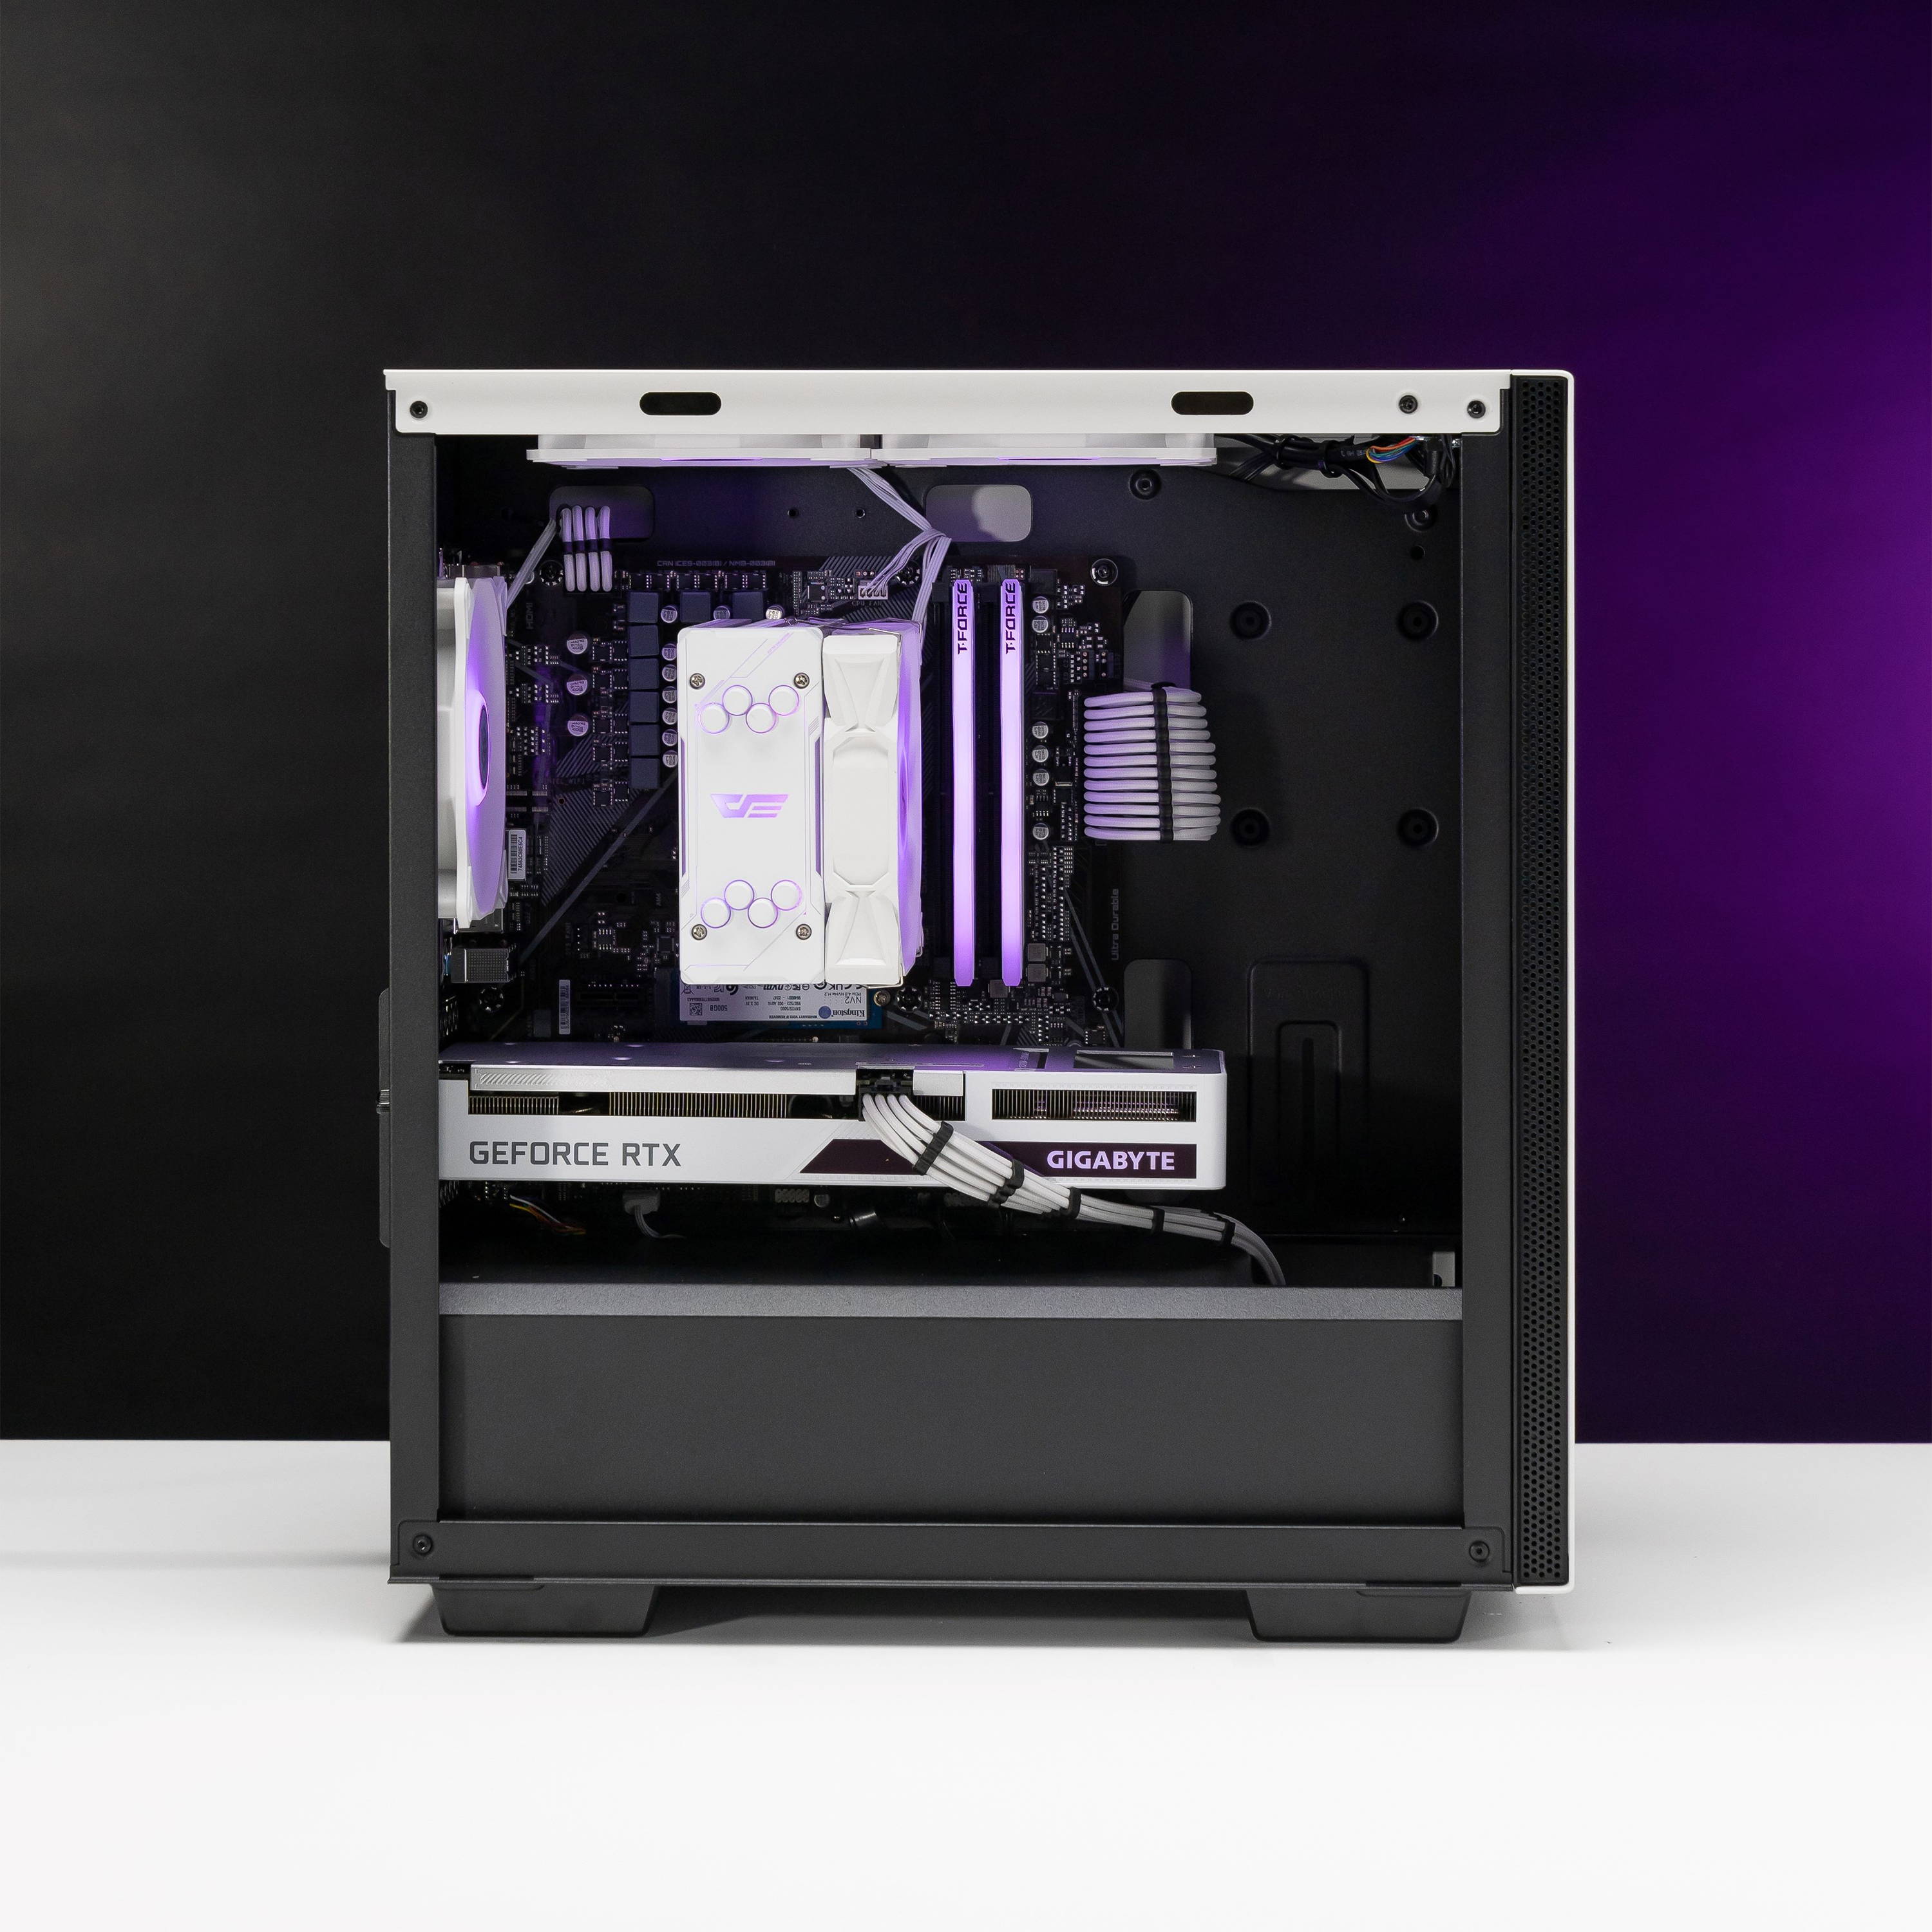 Snow Gaming PC by Radium in all white